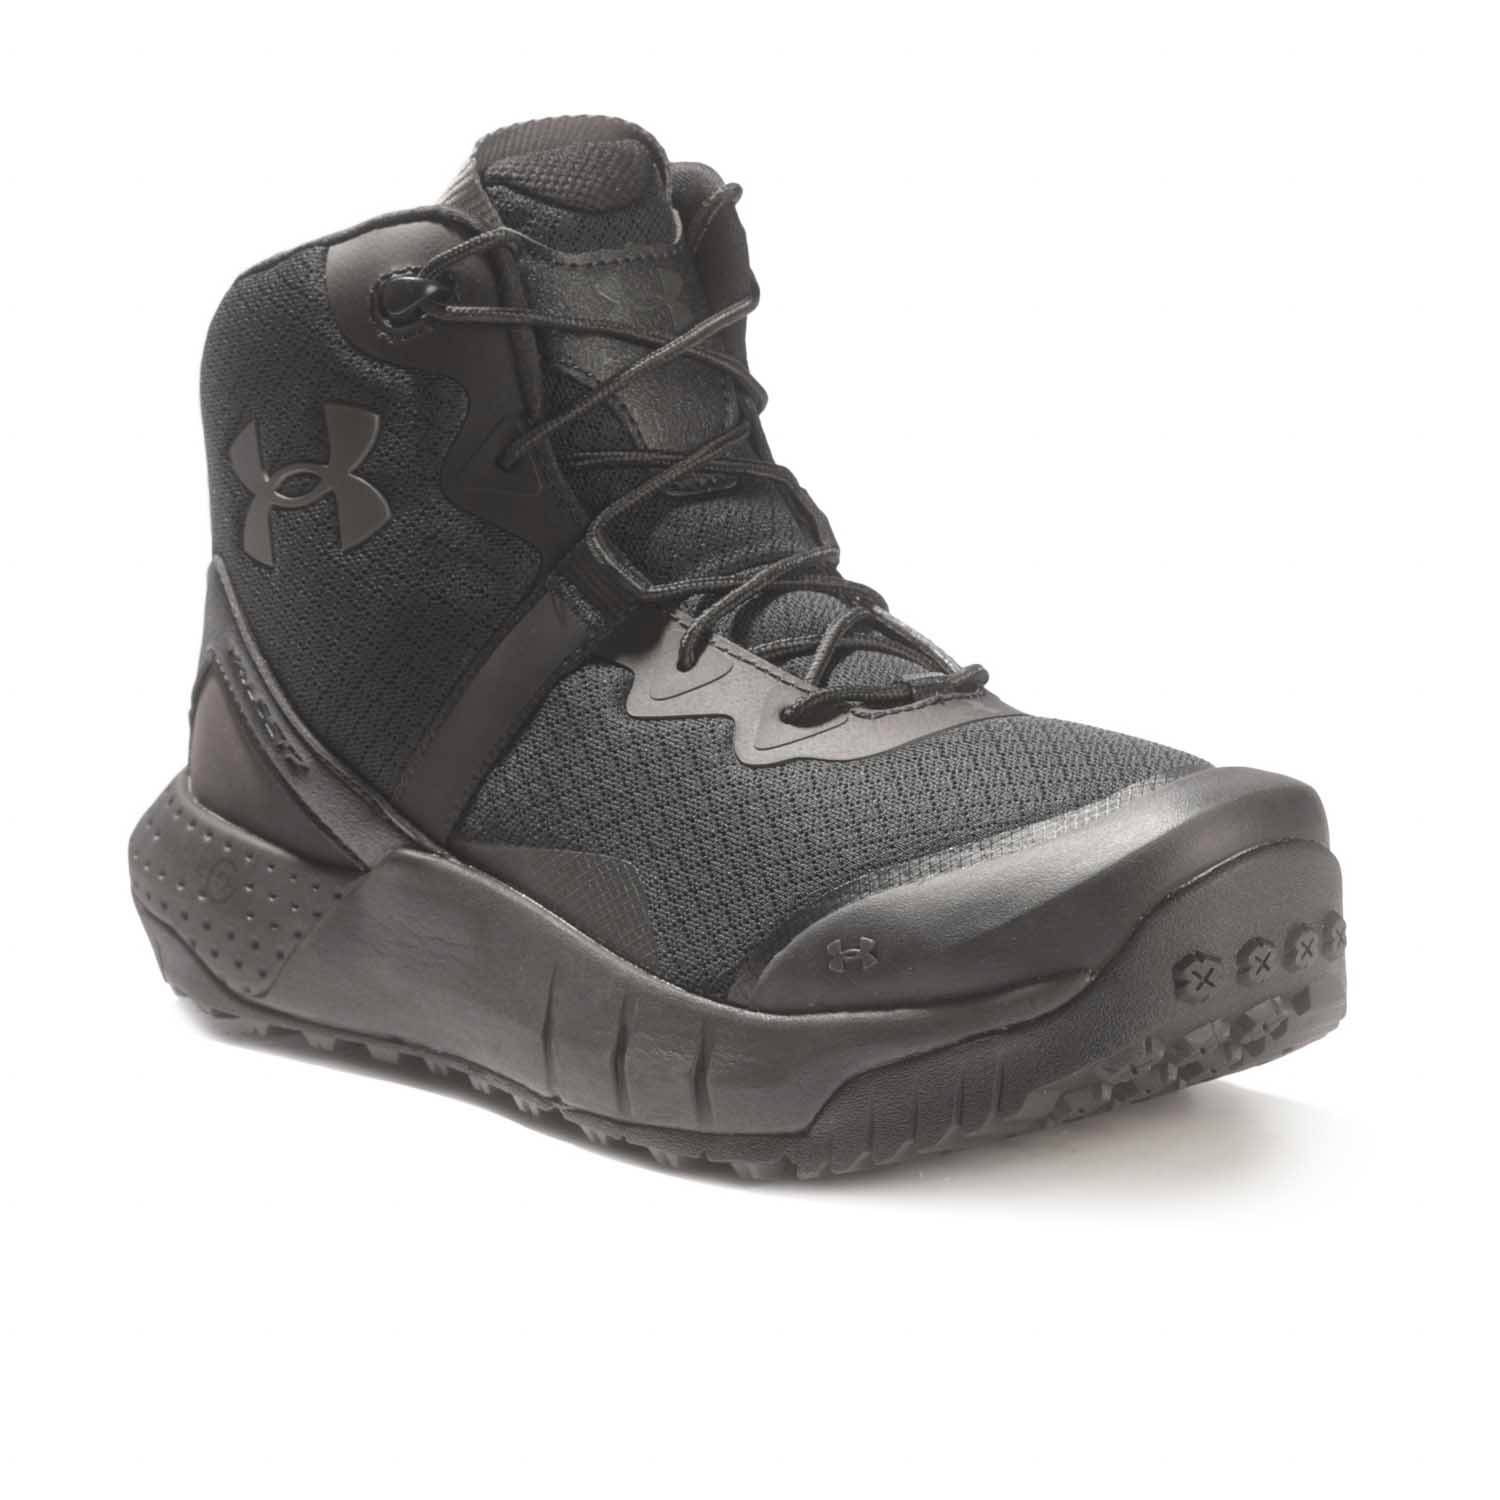 Under Armour Mens Micro G Valsetz Zip Military and Tactical Boot 